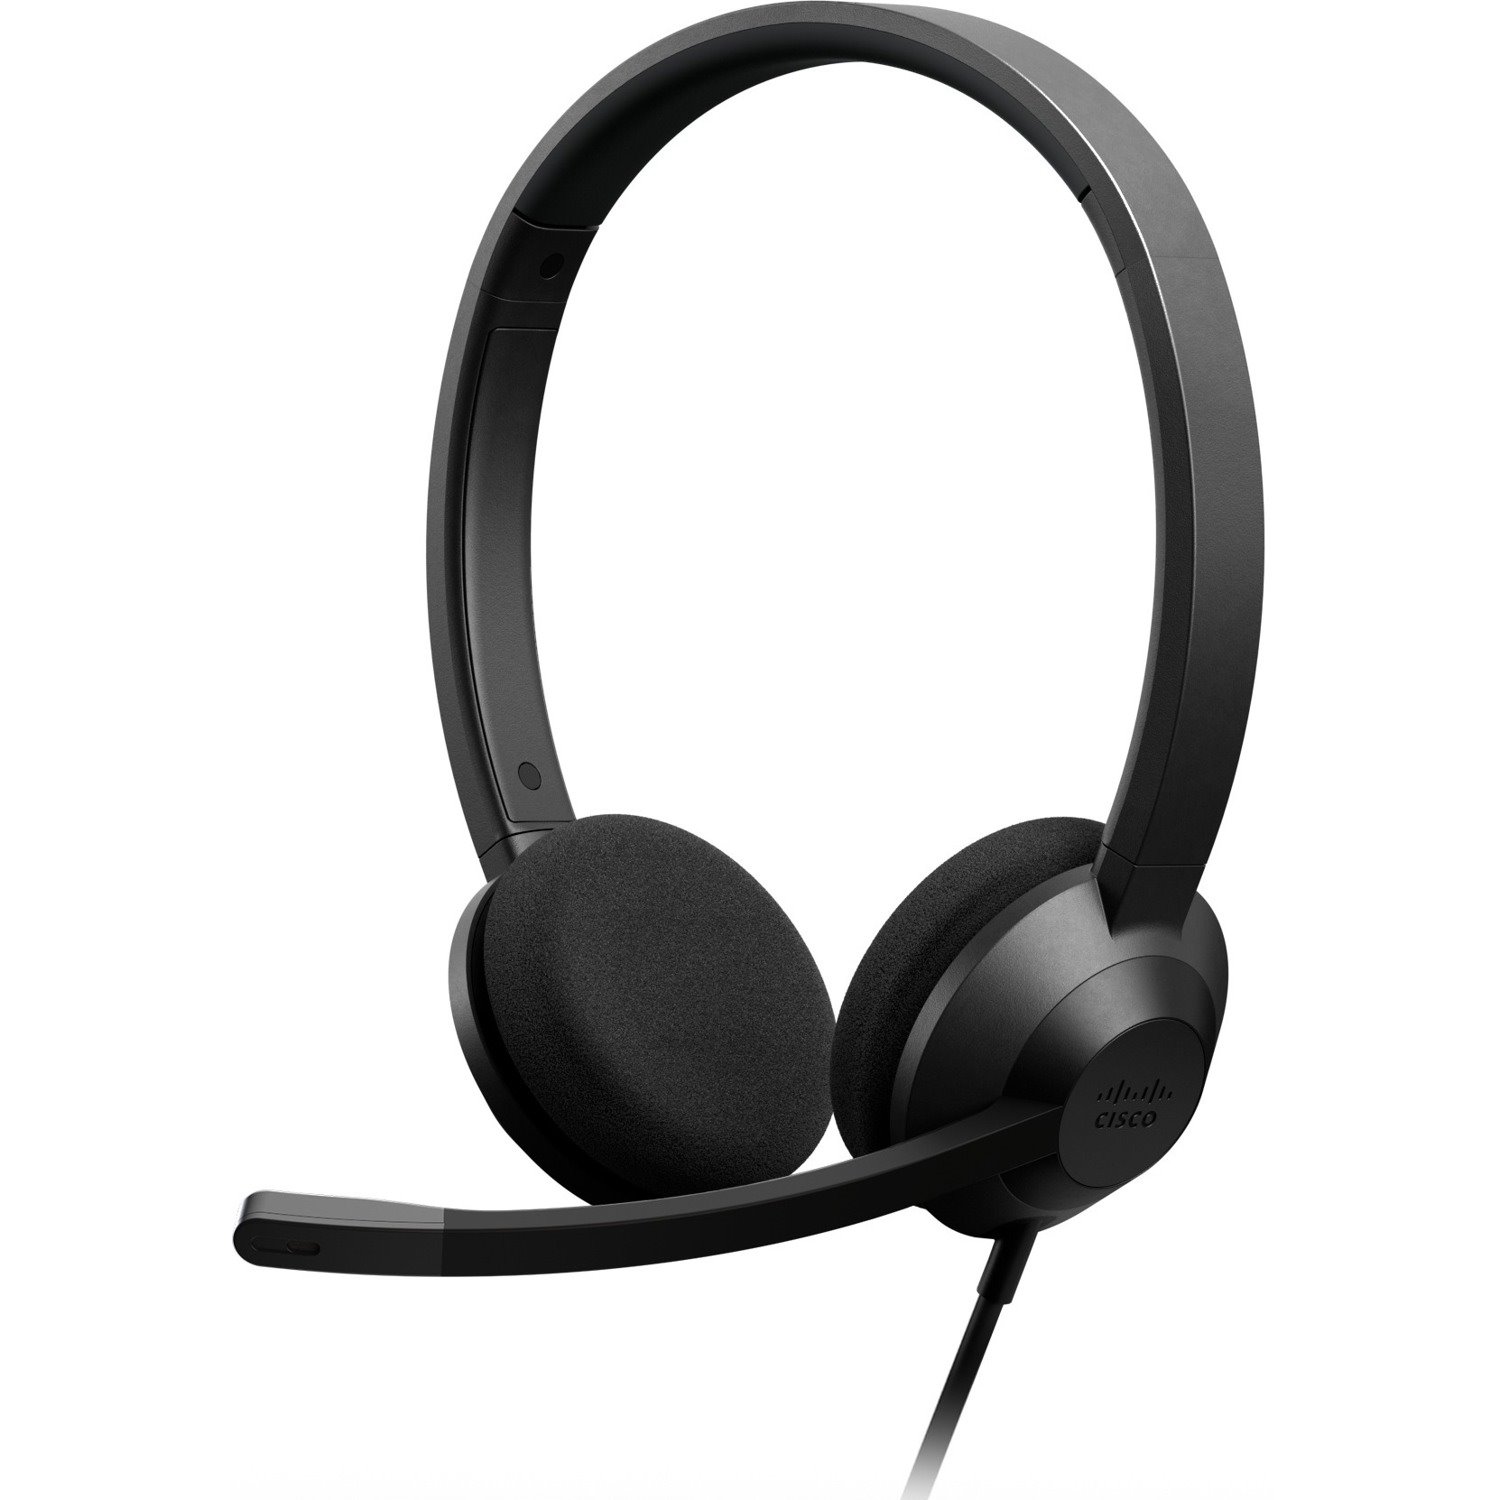 Cisco 322 Wired On-ear Stereo Headset - Carbon Black